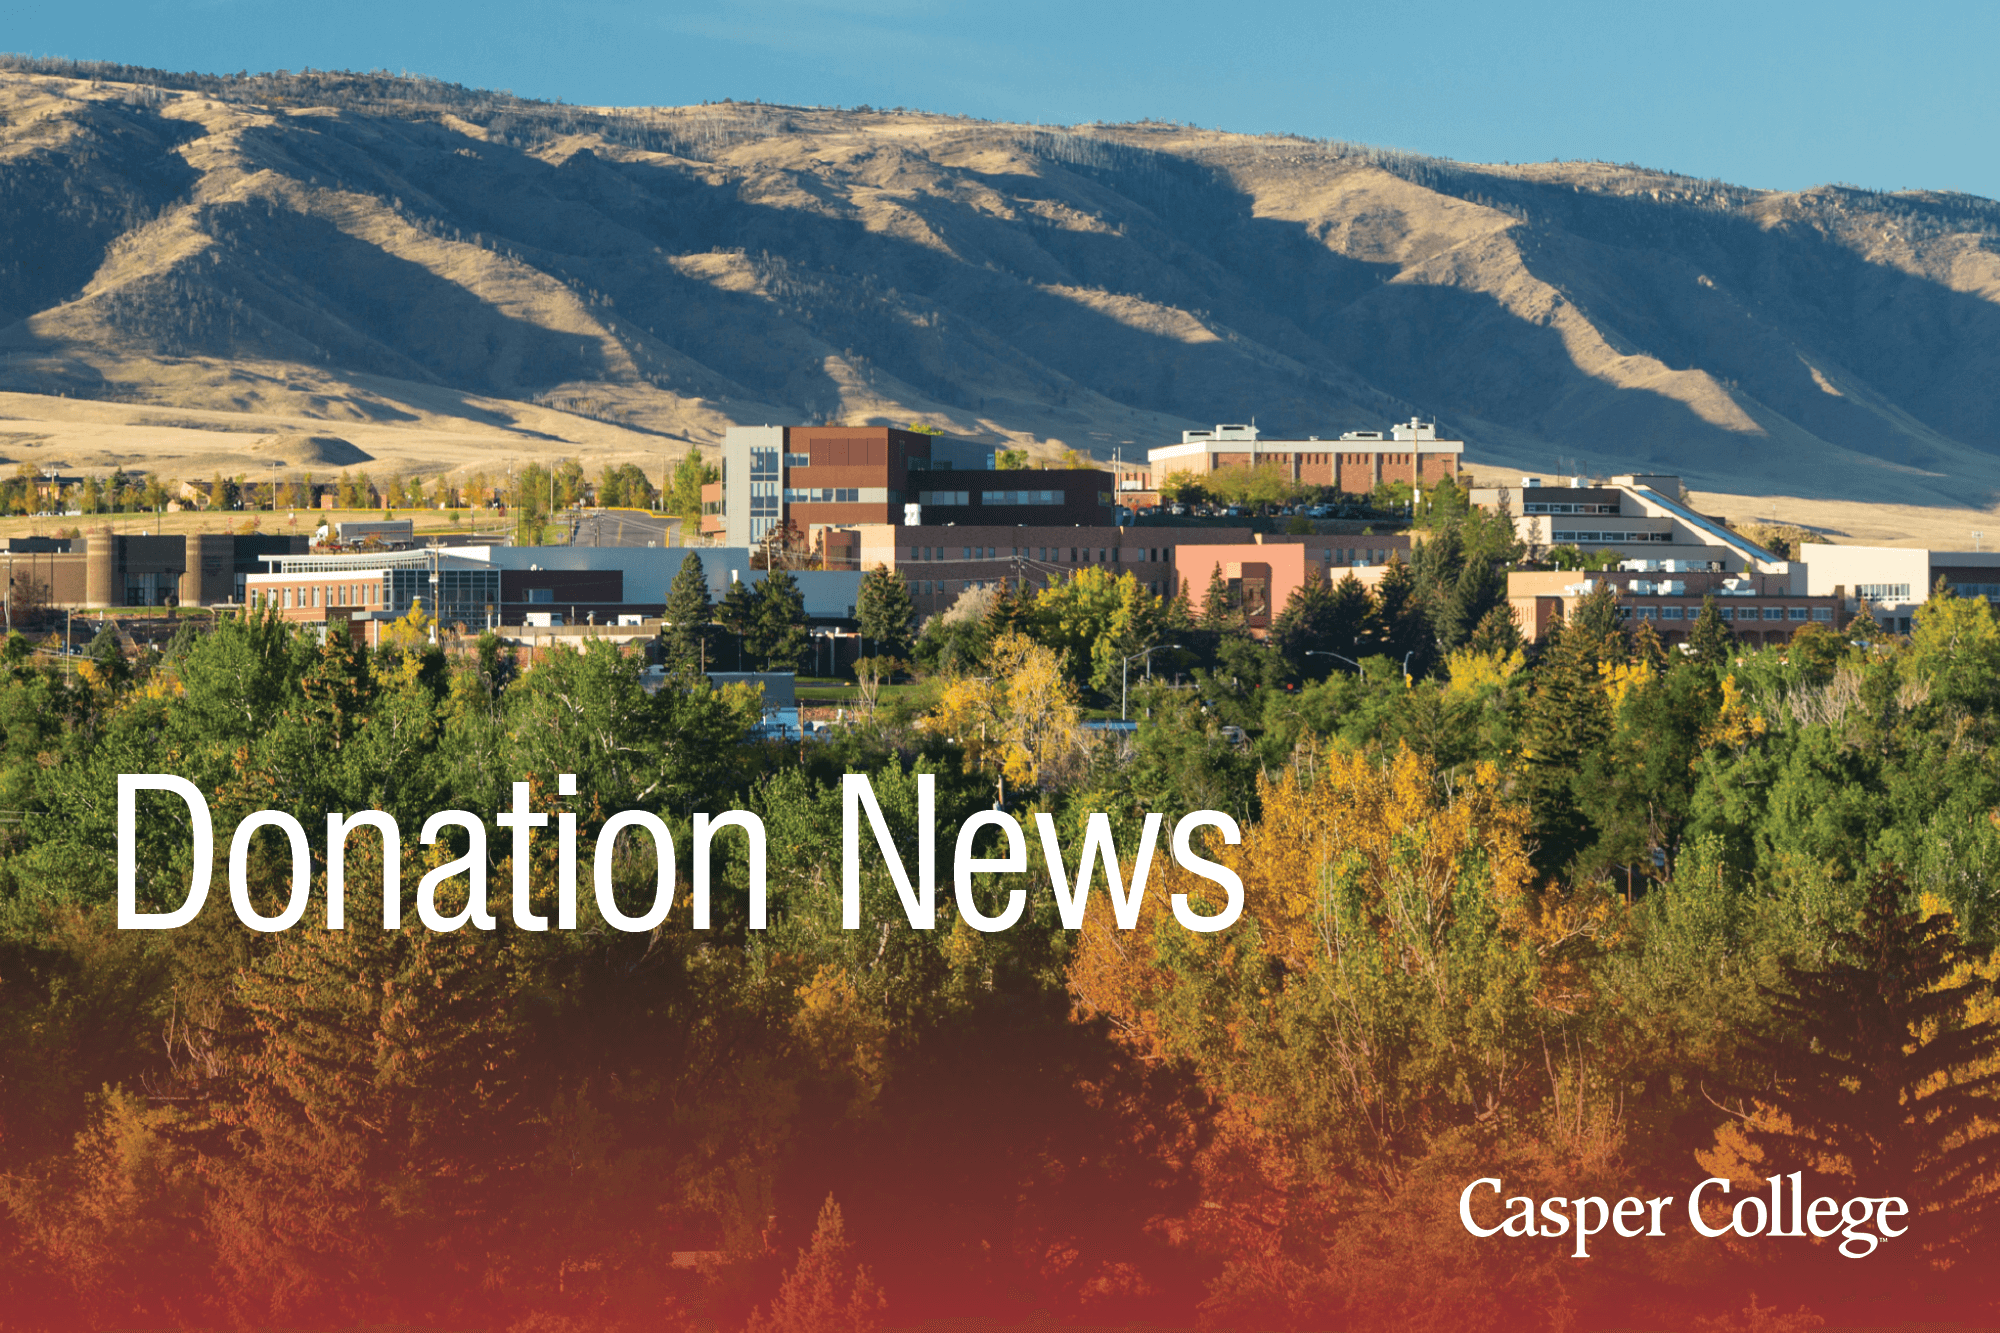 Photo of the Casper College campus with the words "Donation News."